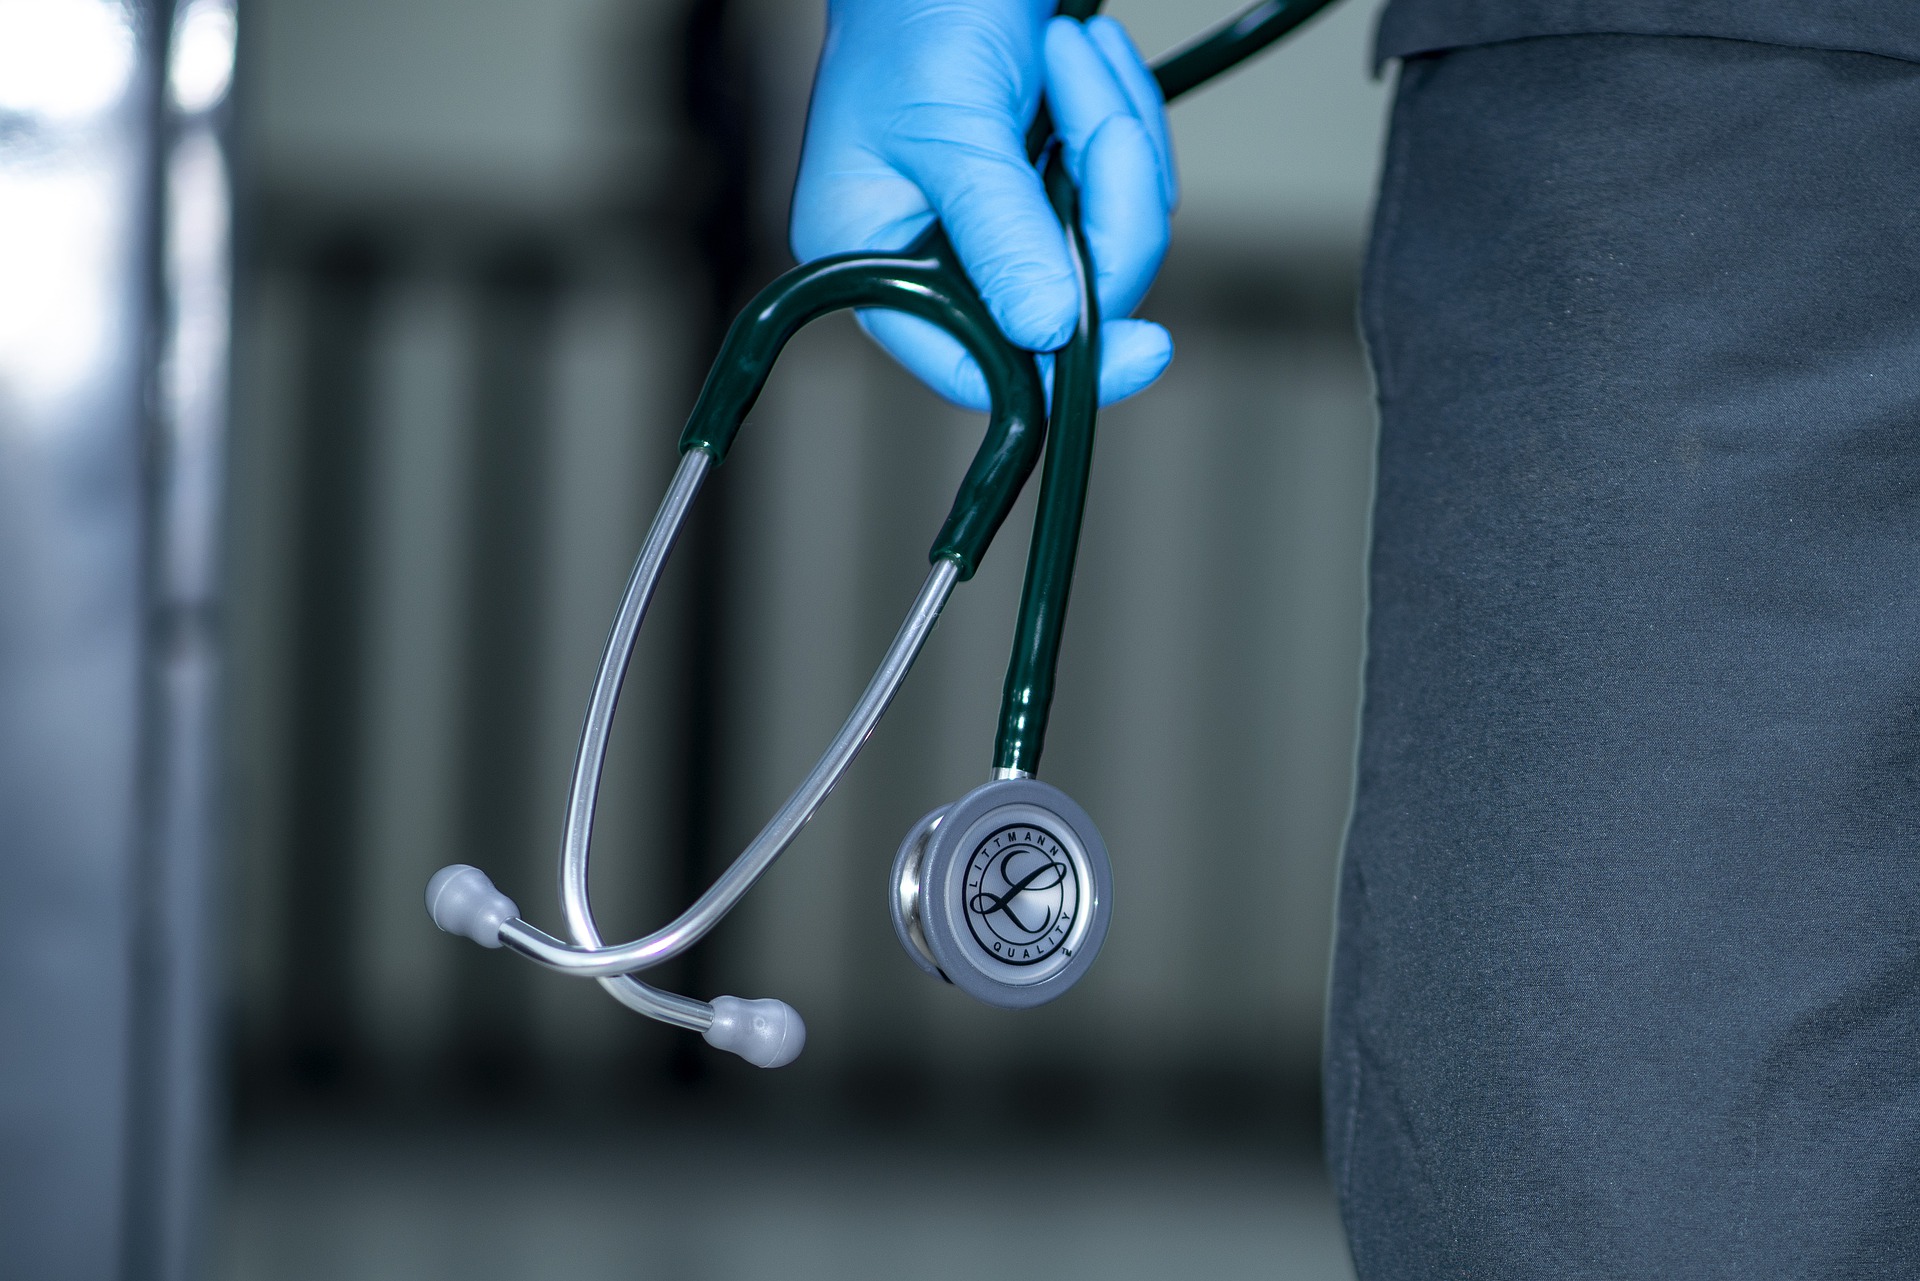 A stethoscope held in a blue gloved hand